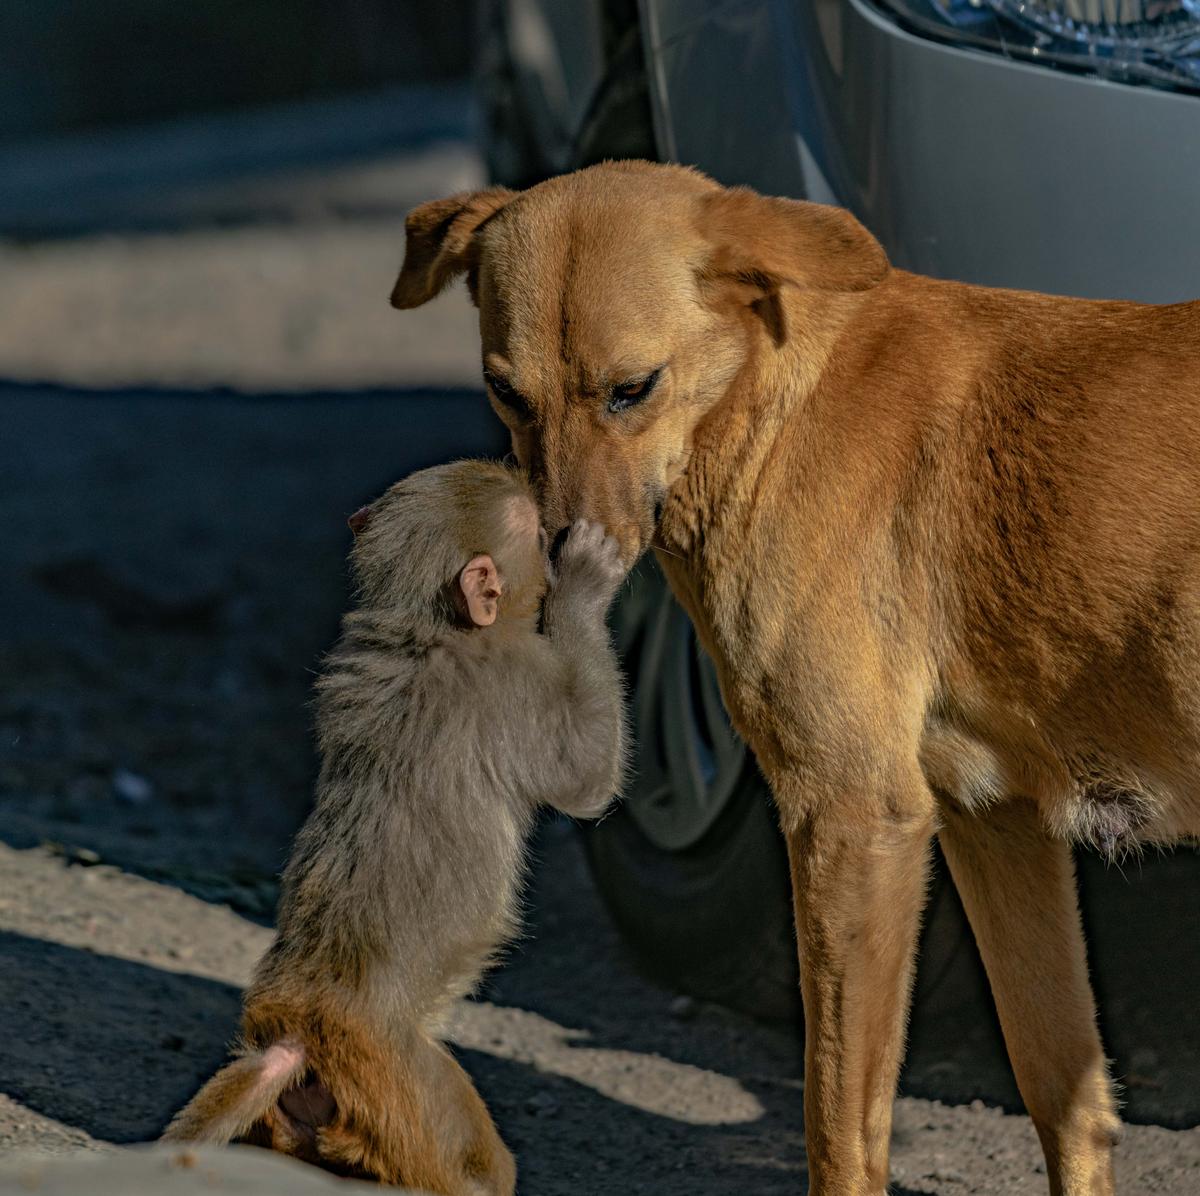 Orphaned monkey interacts closely with a pregnant dog in Chakki Mod, Solan, in Himachal Pradesh, northern India. (Caters News)